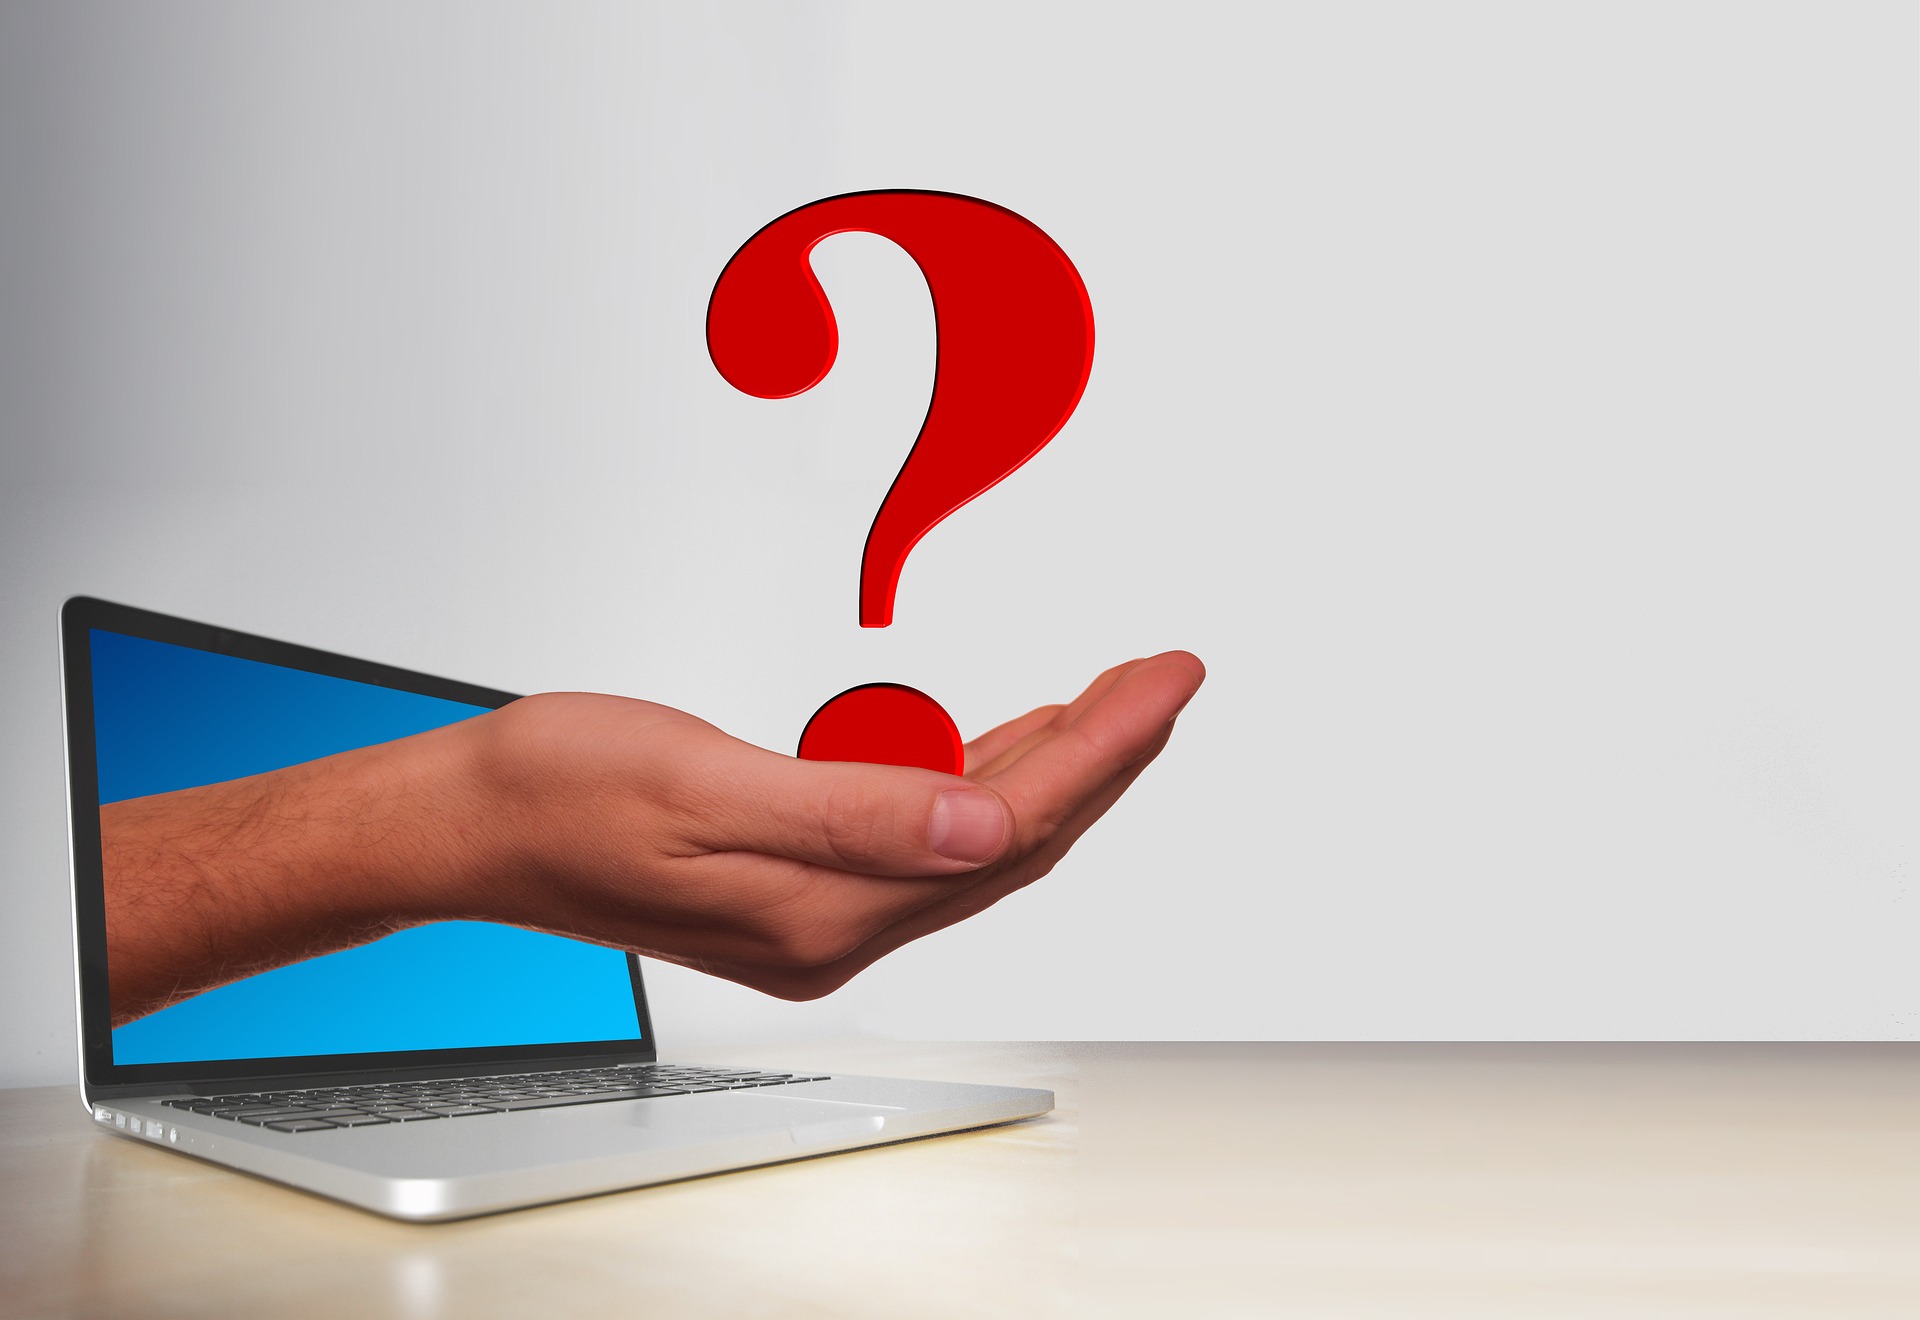 A laptop and a hand coming out of it with a question mark on the hand